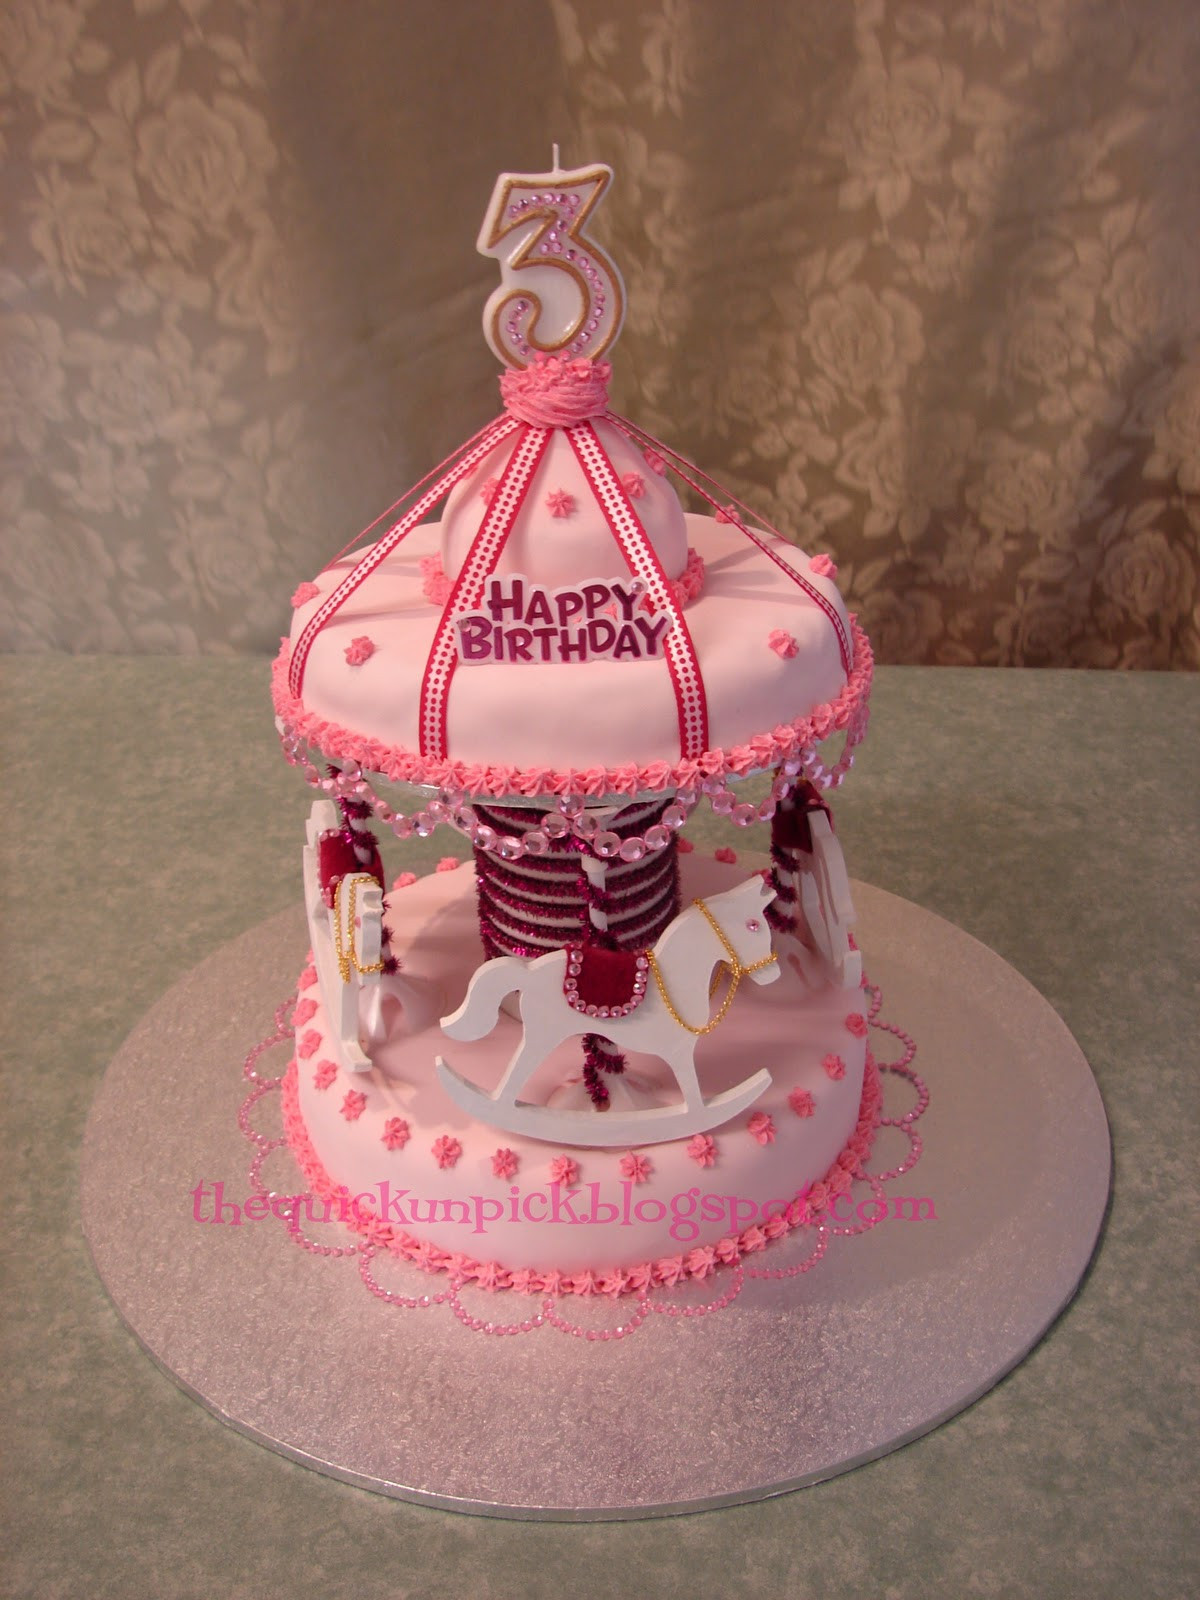 Birthday Cakes For Little Girls
 The Quick Unpick Beautiful Birthday Cakes Princesses a